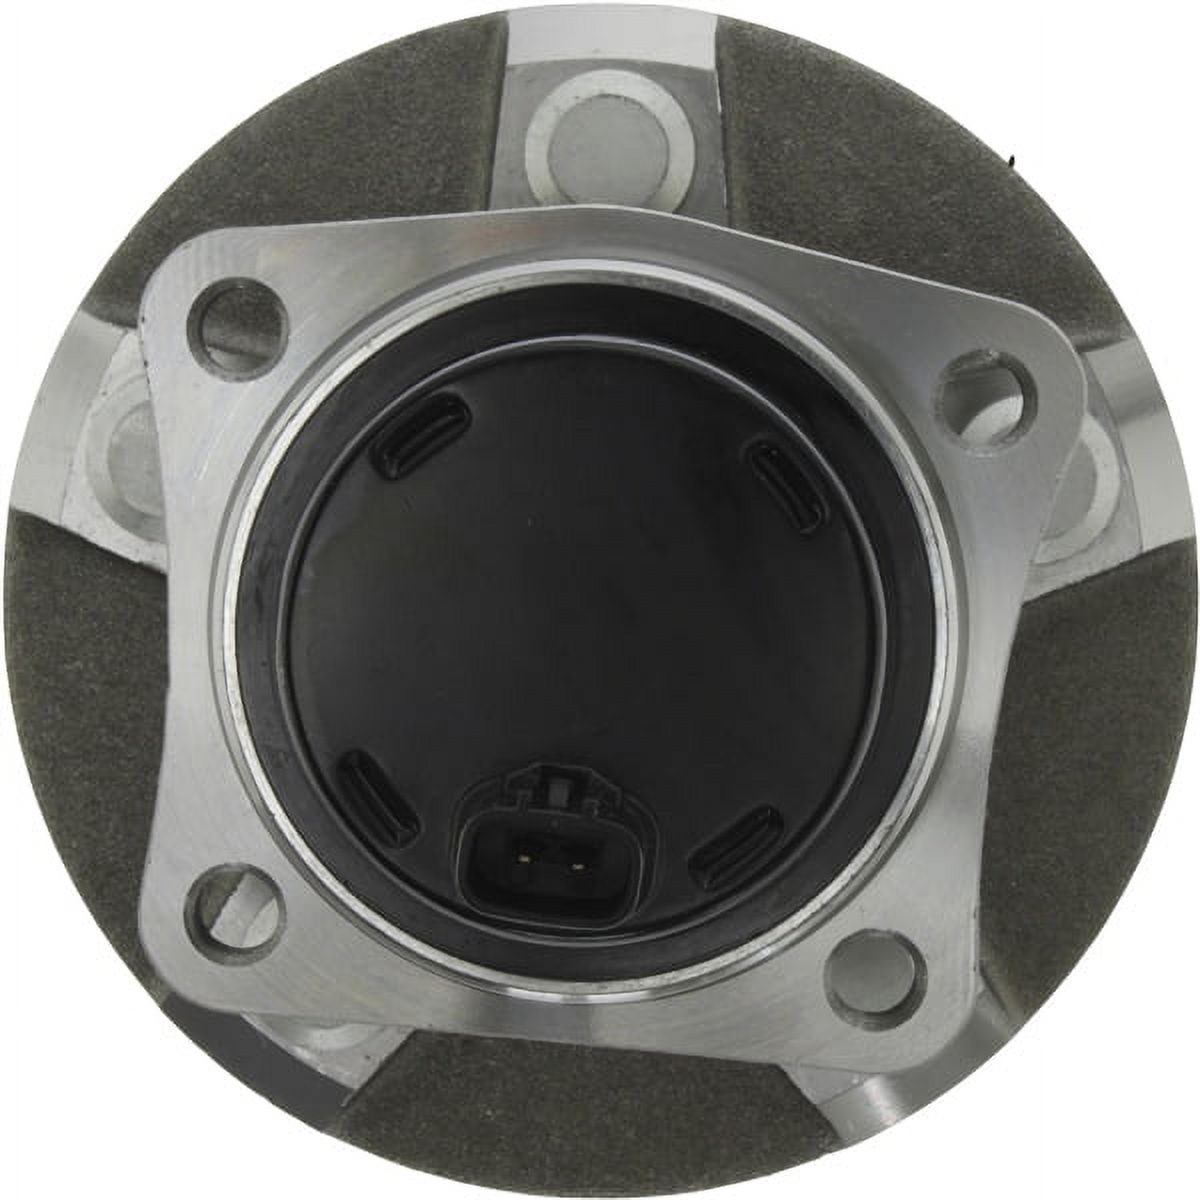 Centric Parts Wheel Bearing and Hub Assembly P/N:407.44012E Fits select: 2003-2008 TOYOTA COROLLA, 2004-2009 TOYOTA PRIUS - image 2 of 5